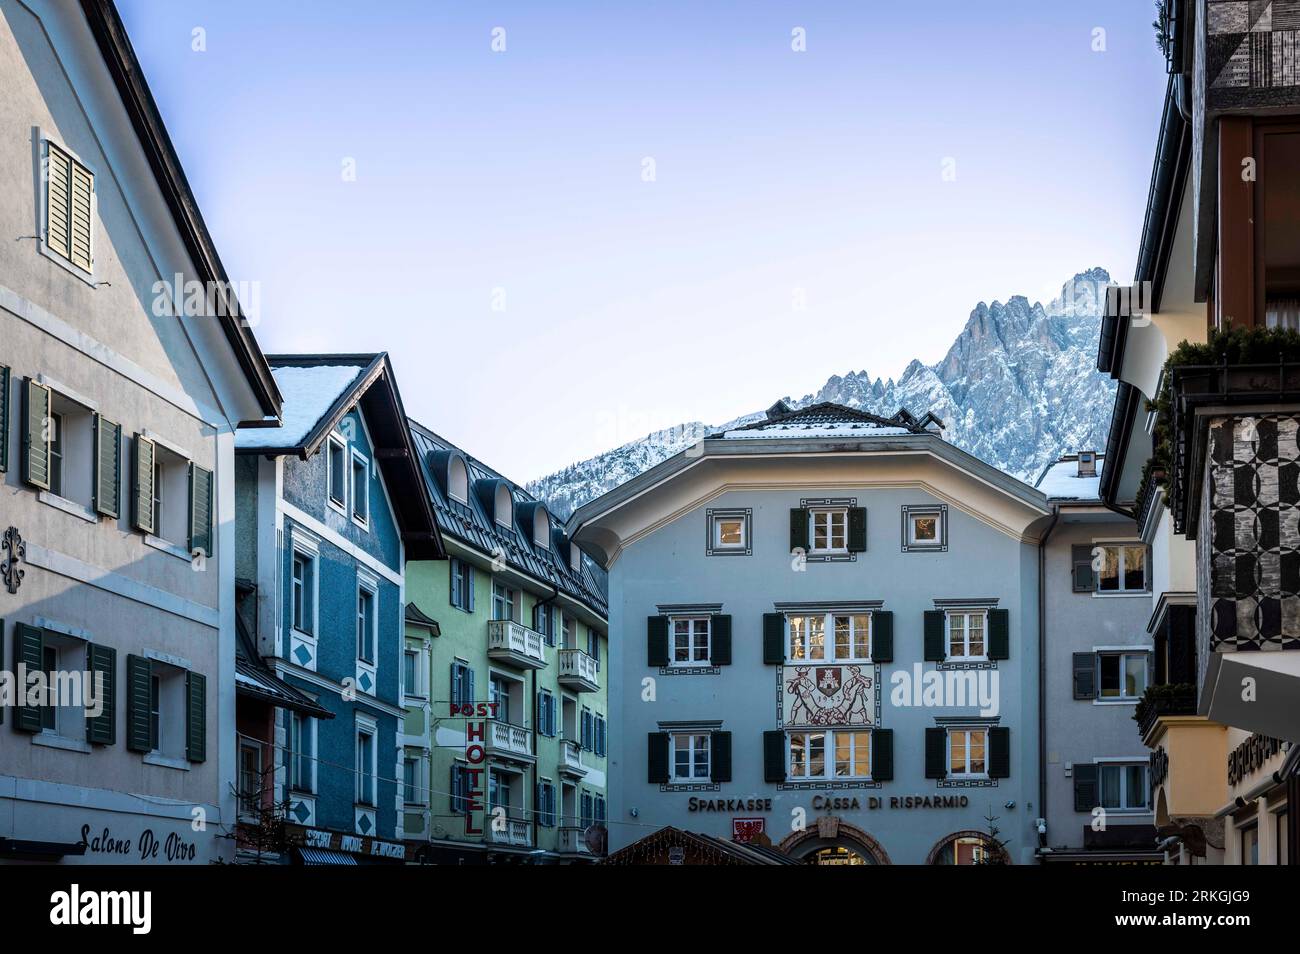 In the streets of San Candido. Christmas atmosphere and art. Stock Photo